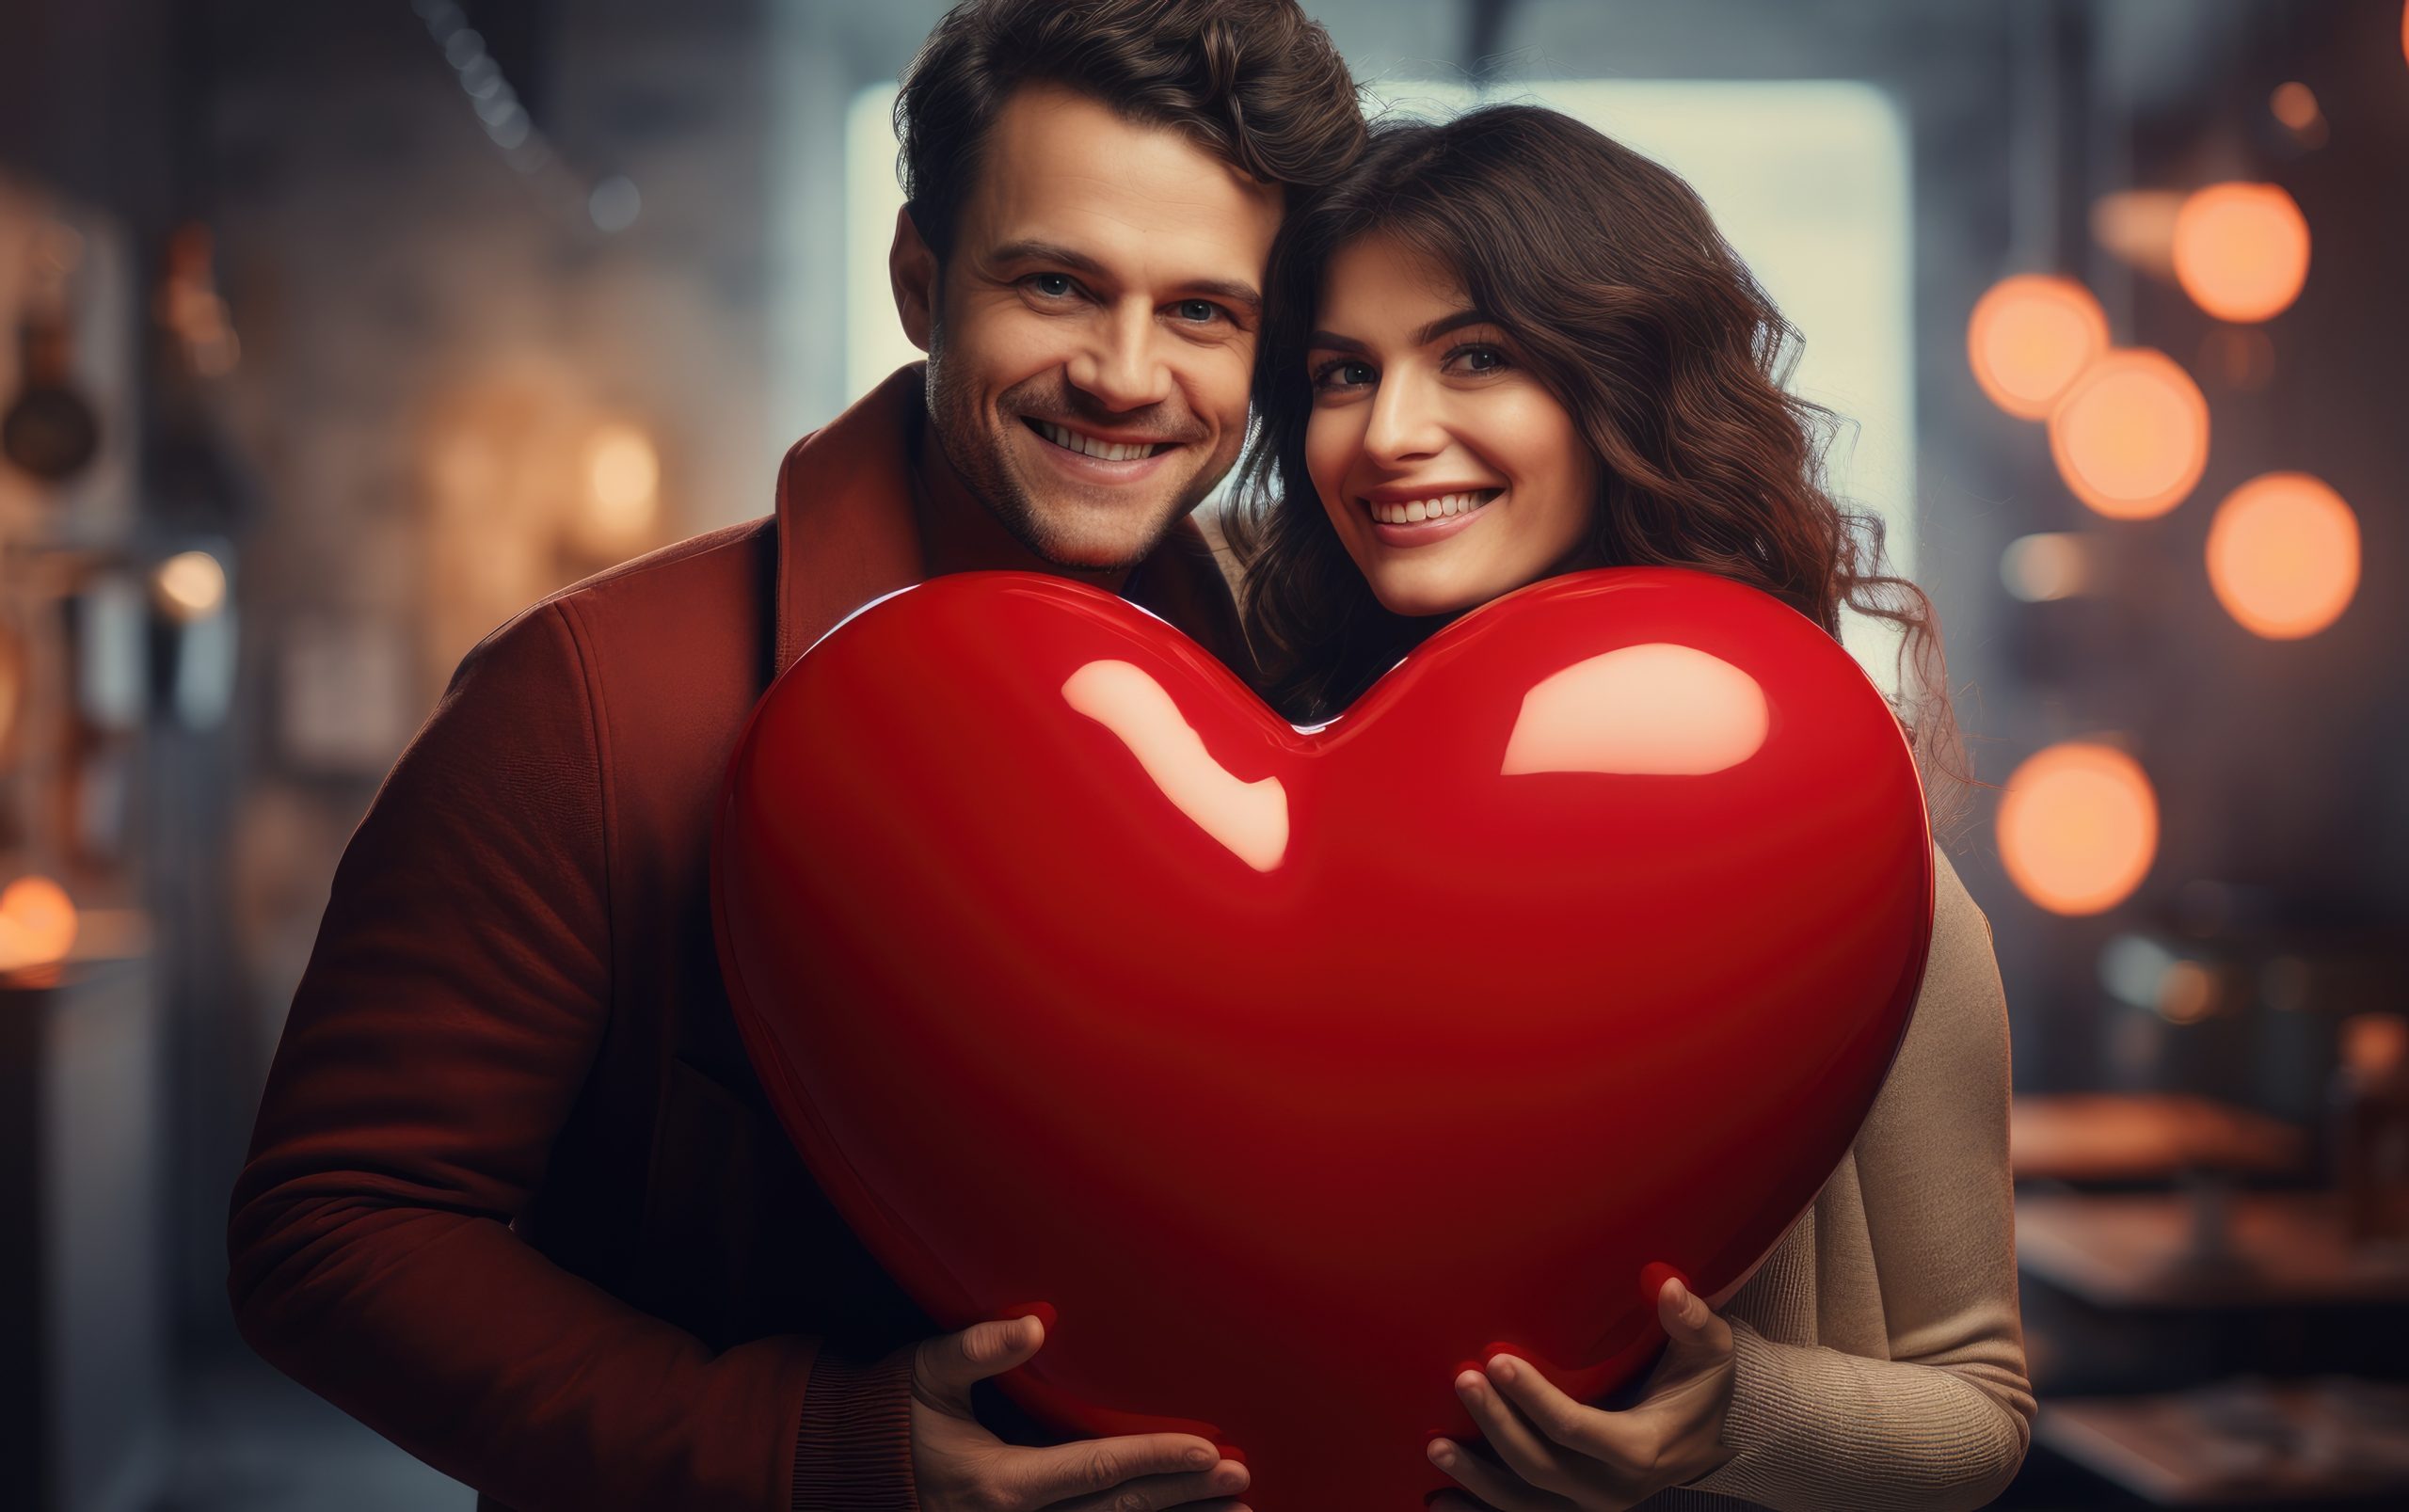 Romantic moment, couple with a big red heart in valentine photoshoot